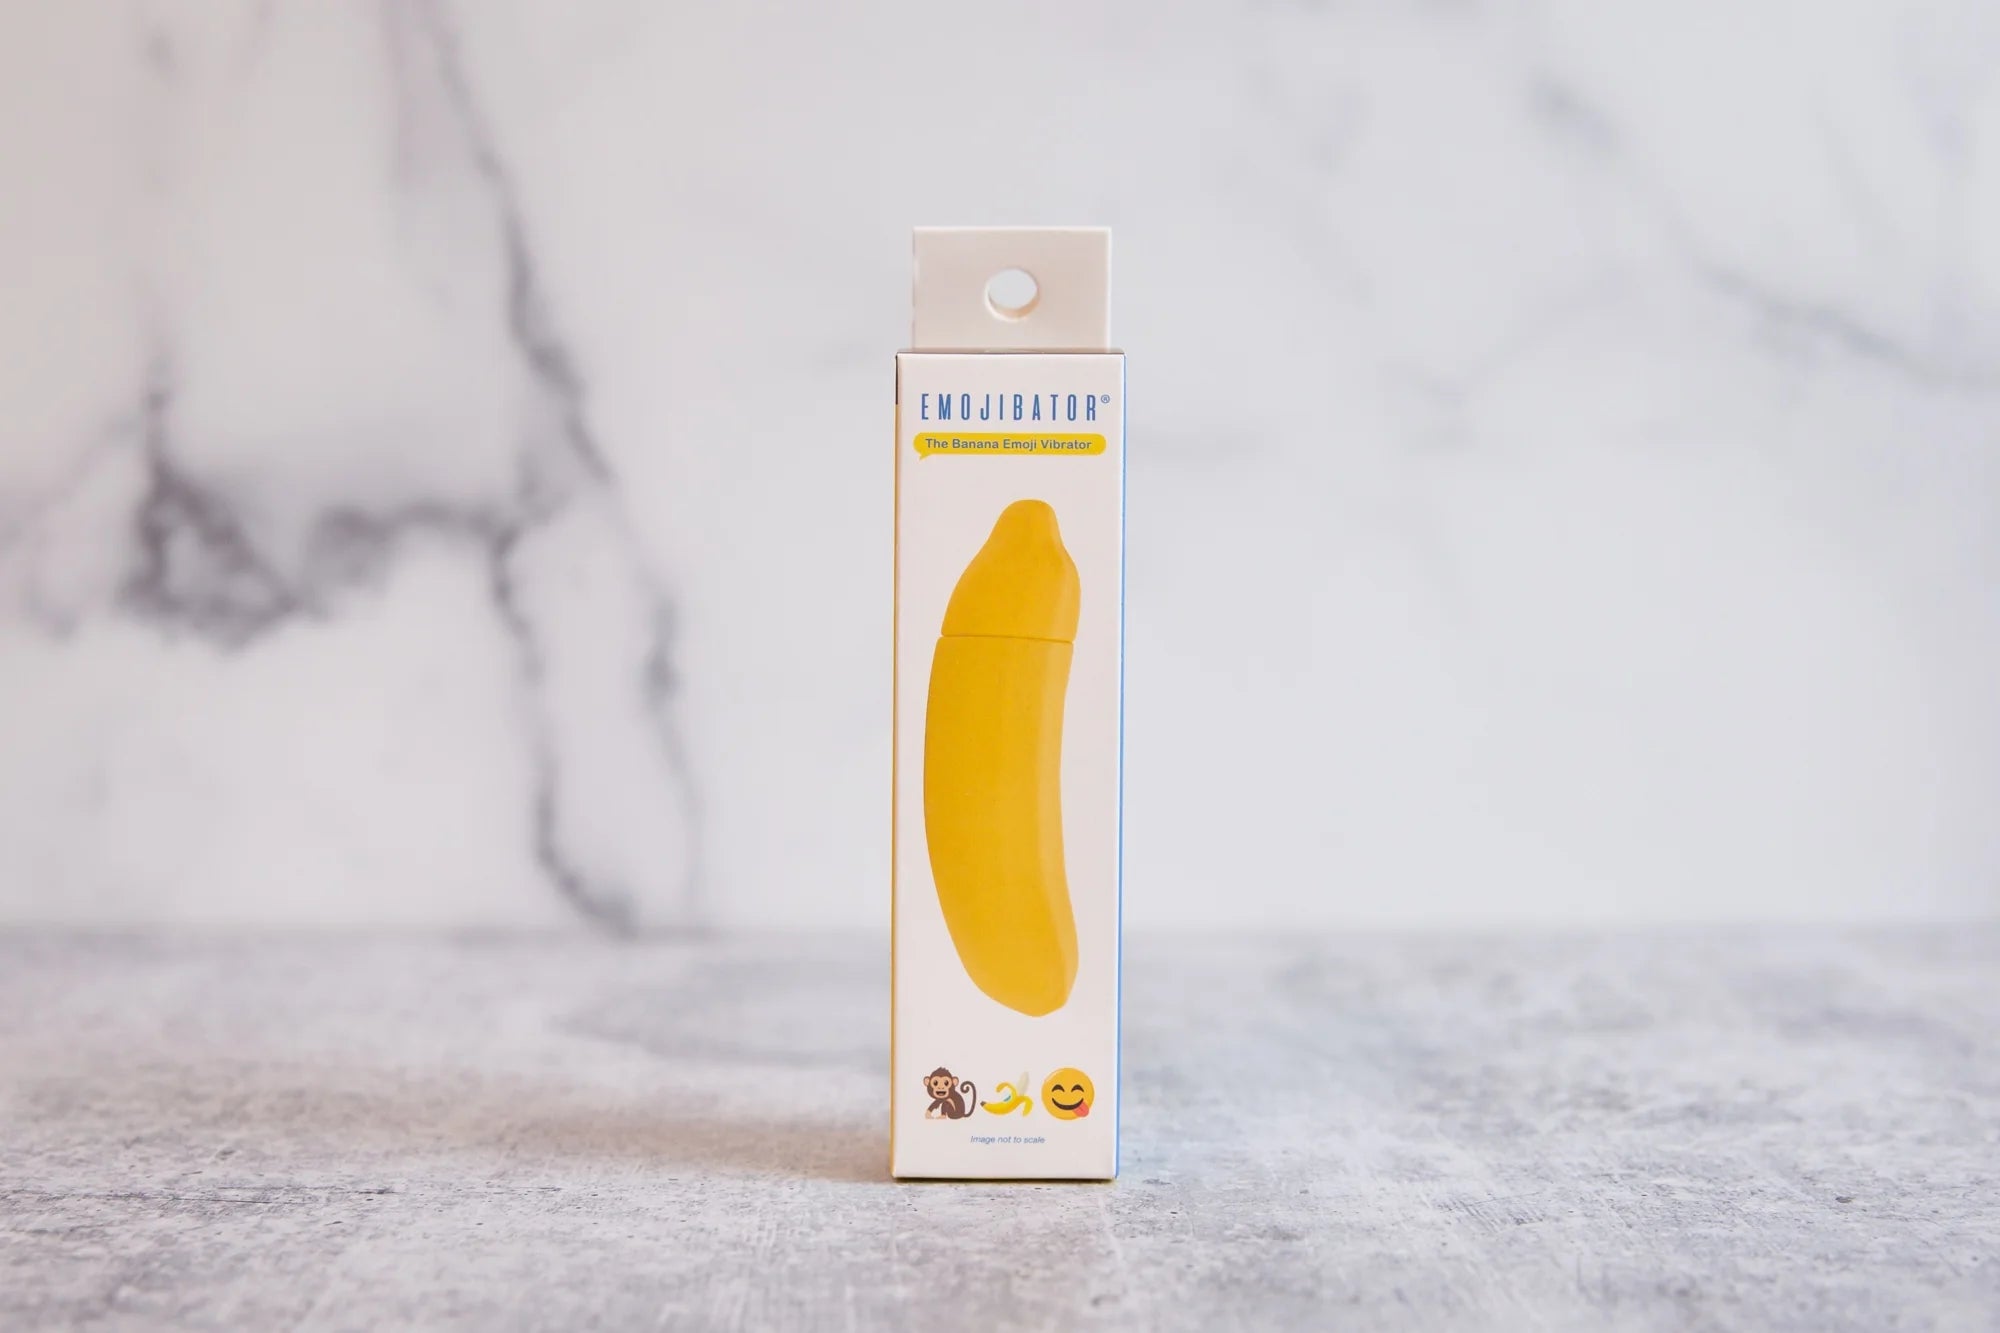 A branded box for an Emojibator sex toy